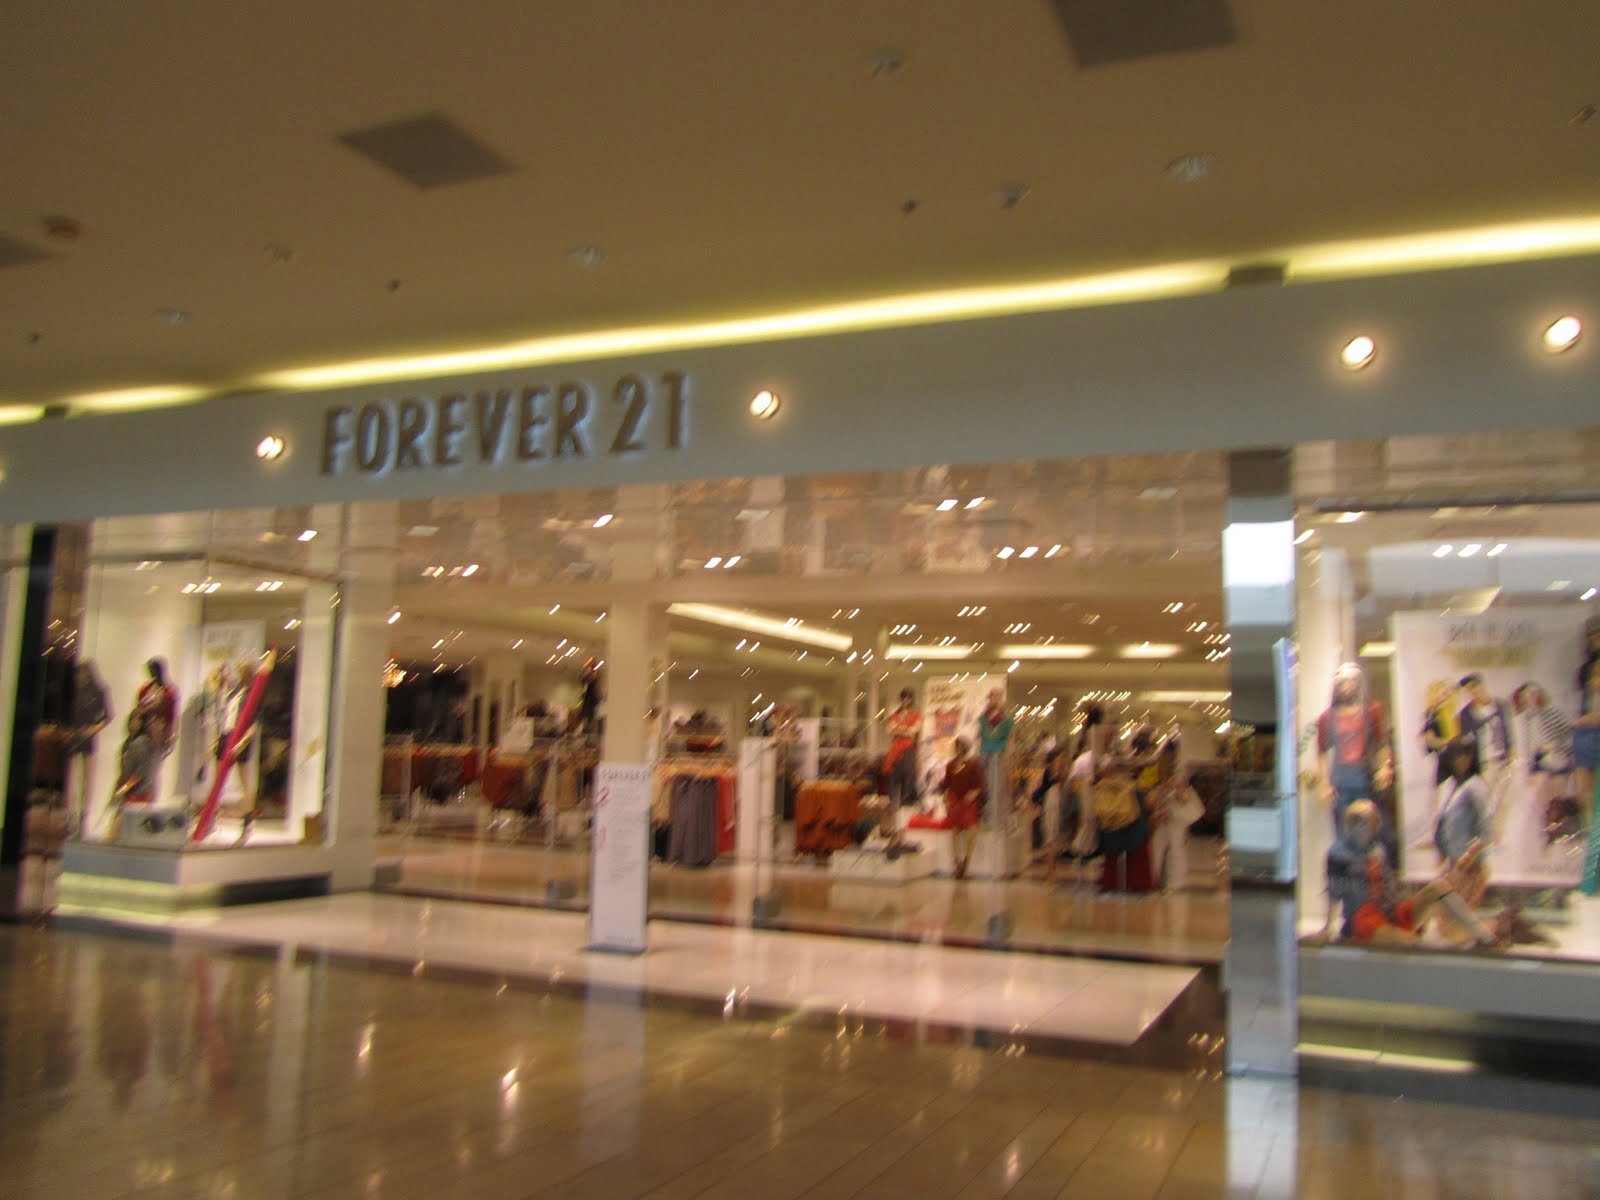 and the biggest forever 21 in the world!!!